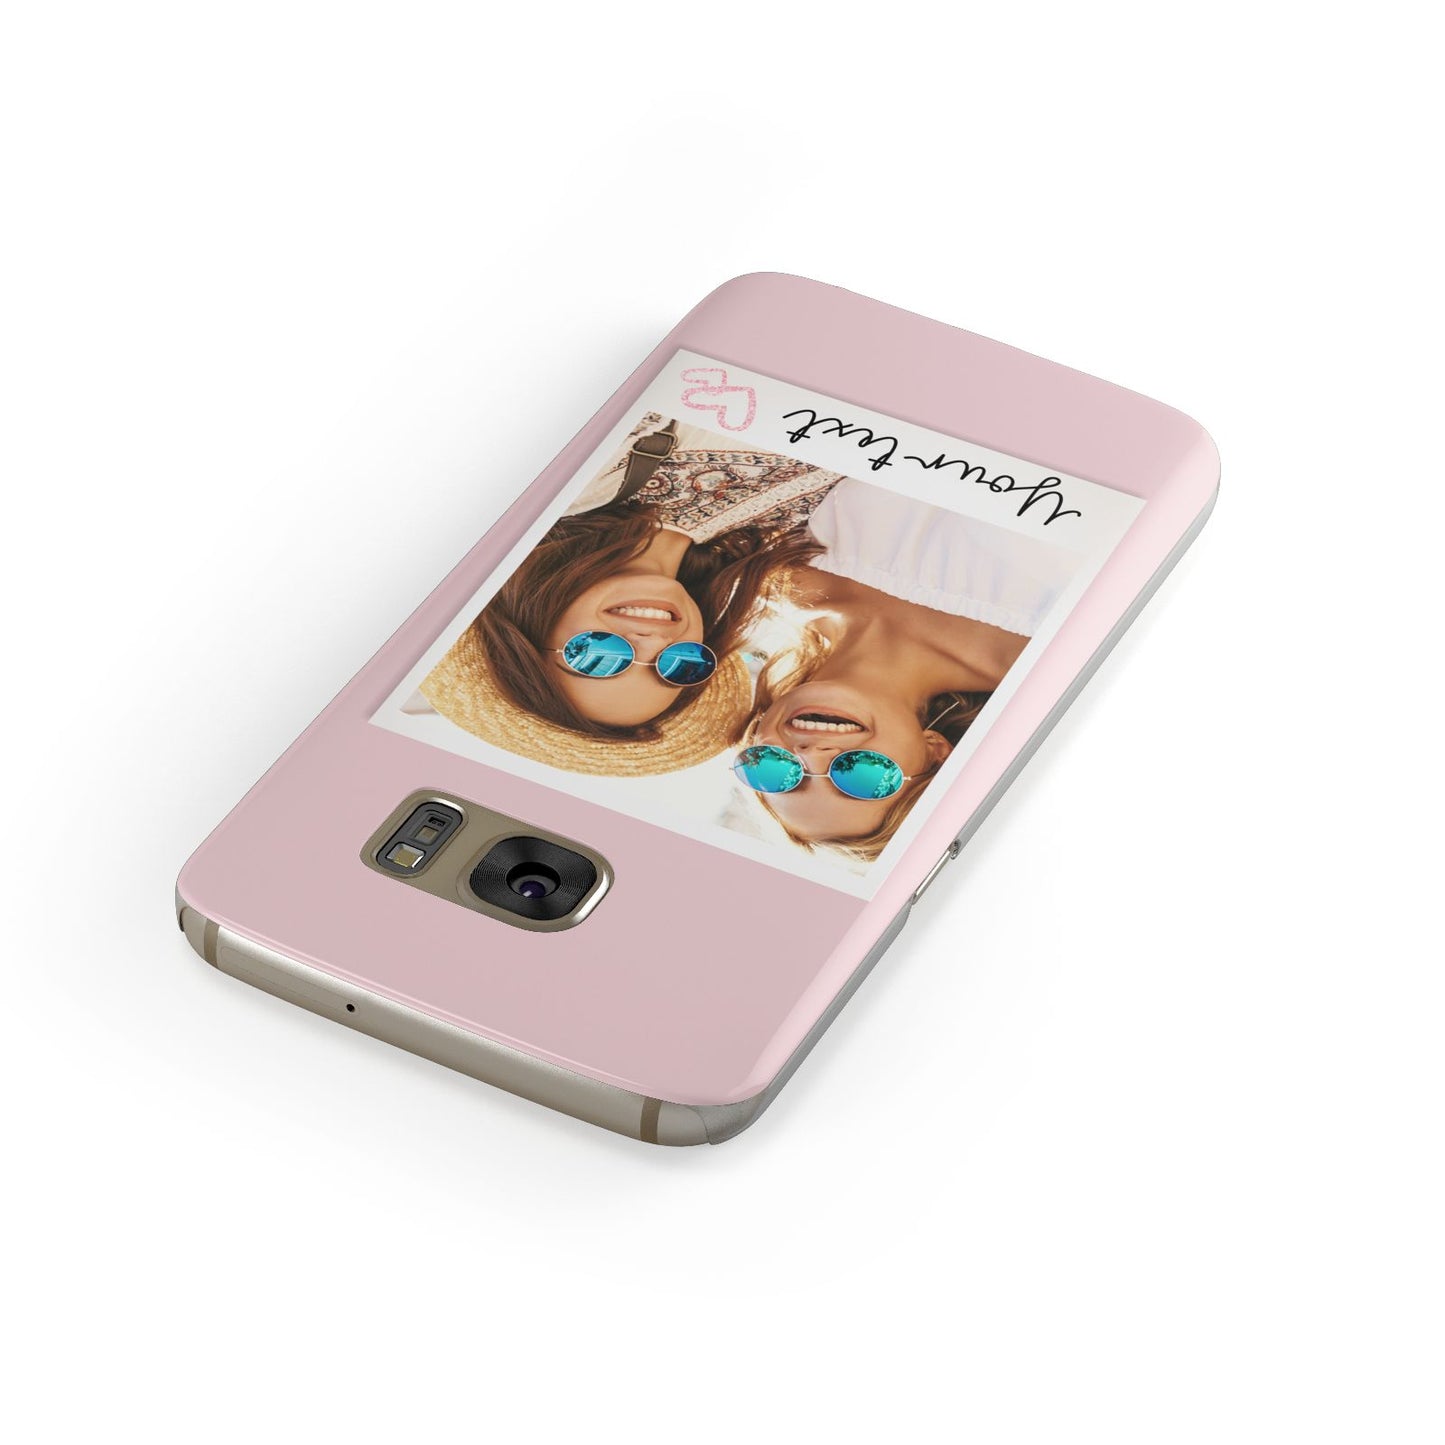 Personalised Best Friend Photo Samsung Galaxy Case Front Close Up